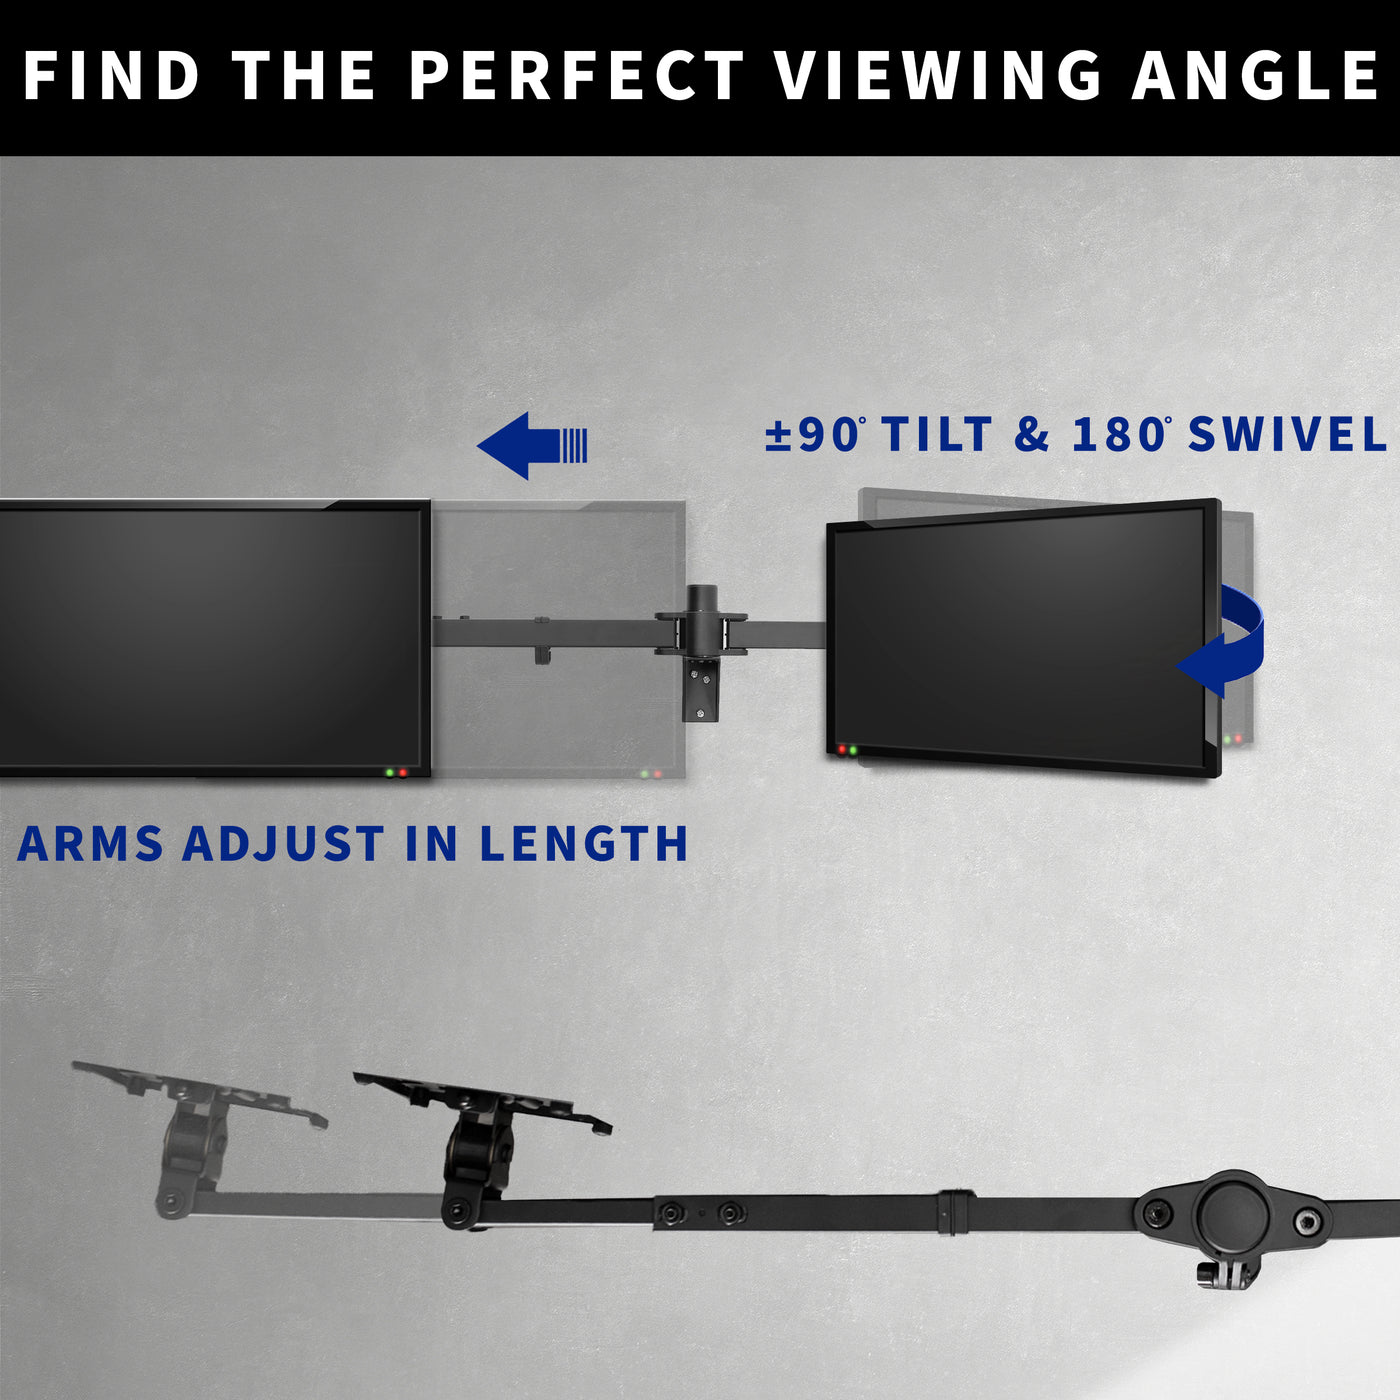 Adjustable arm length of the mount to maximize compatibility.